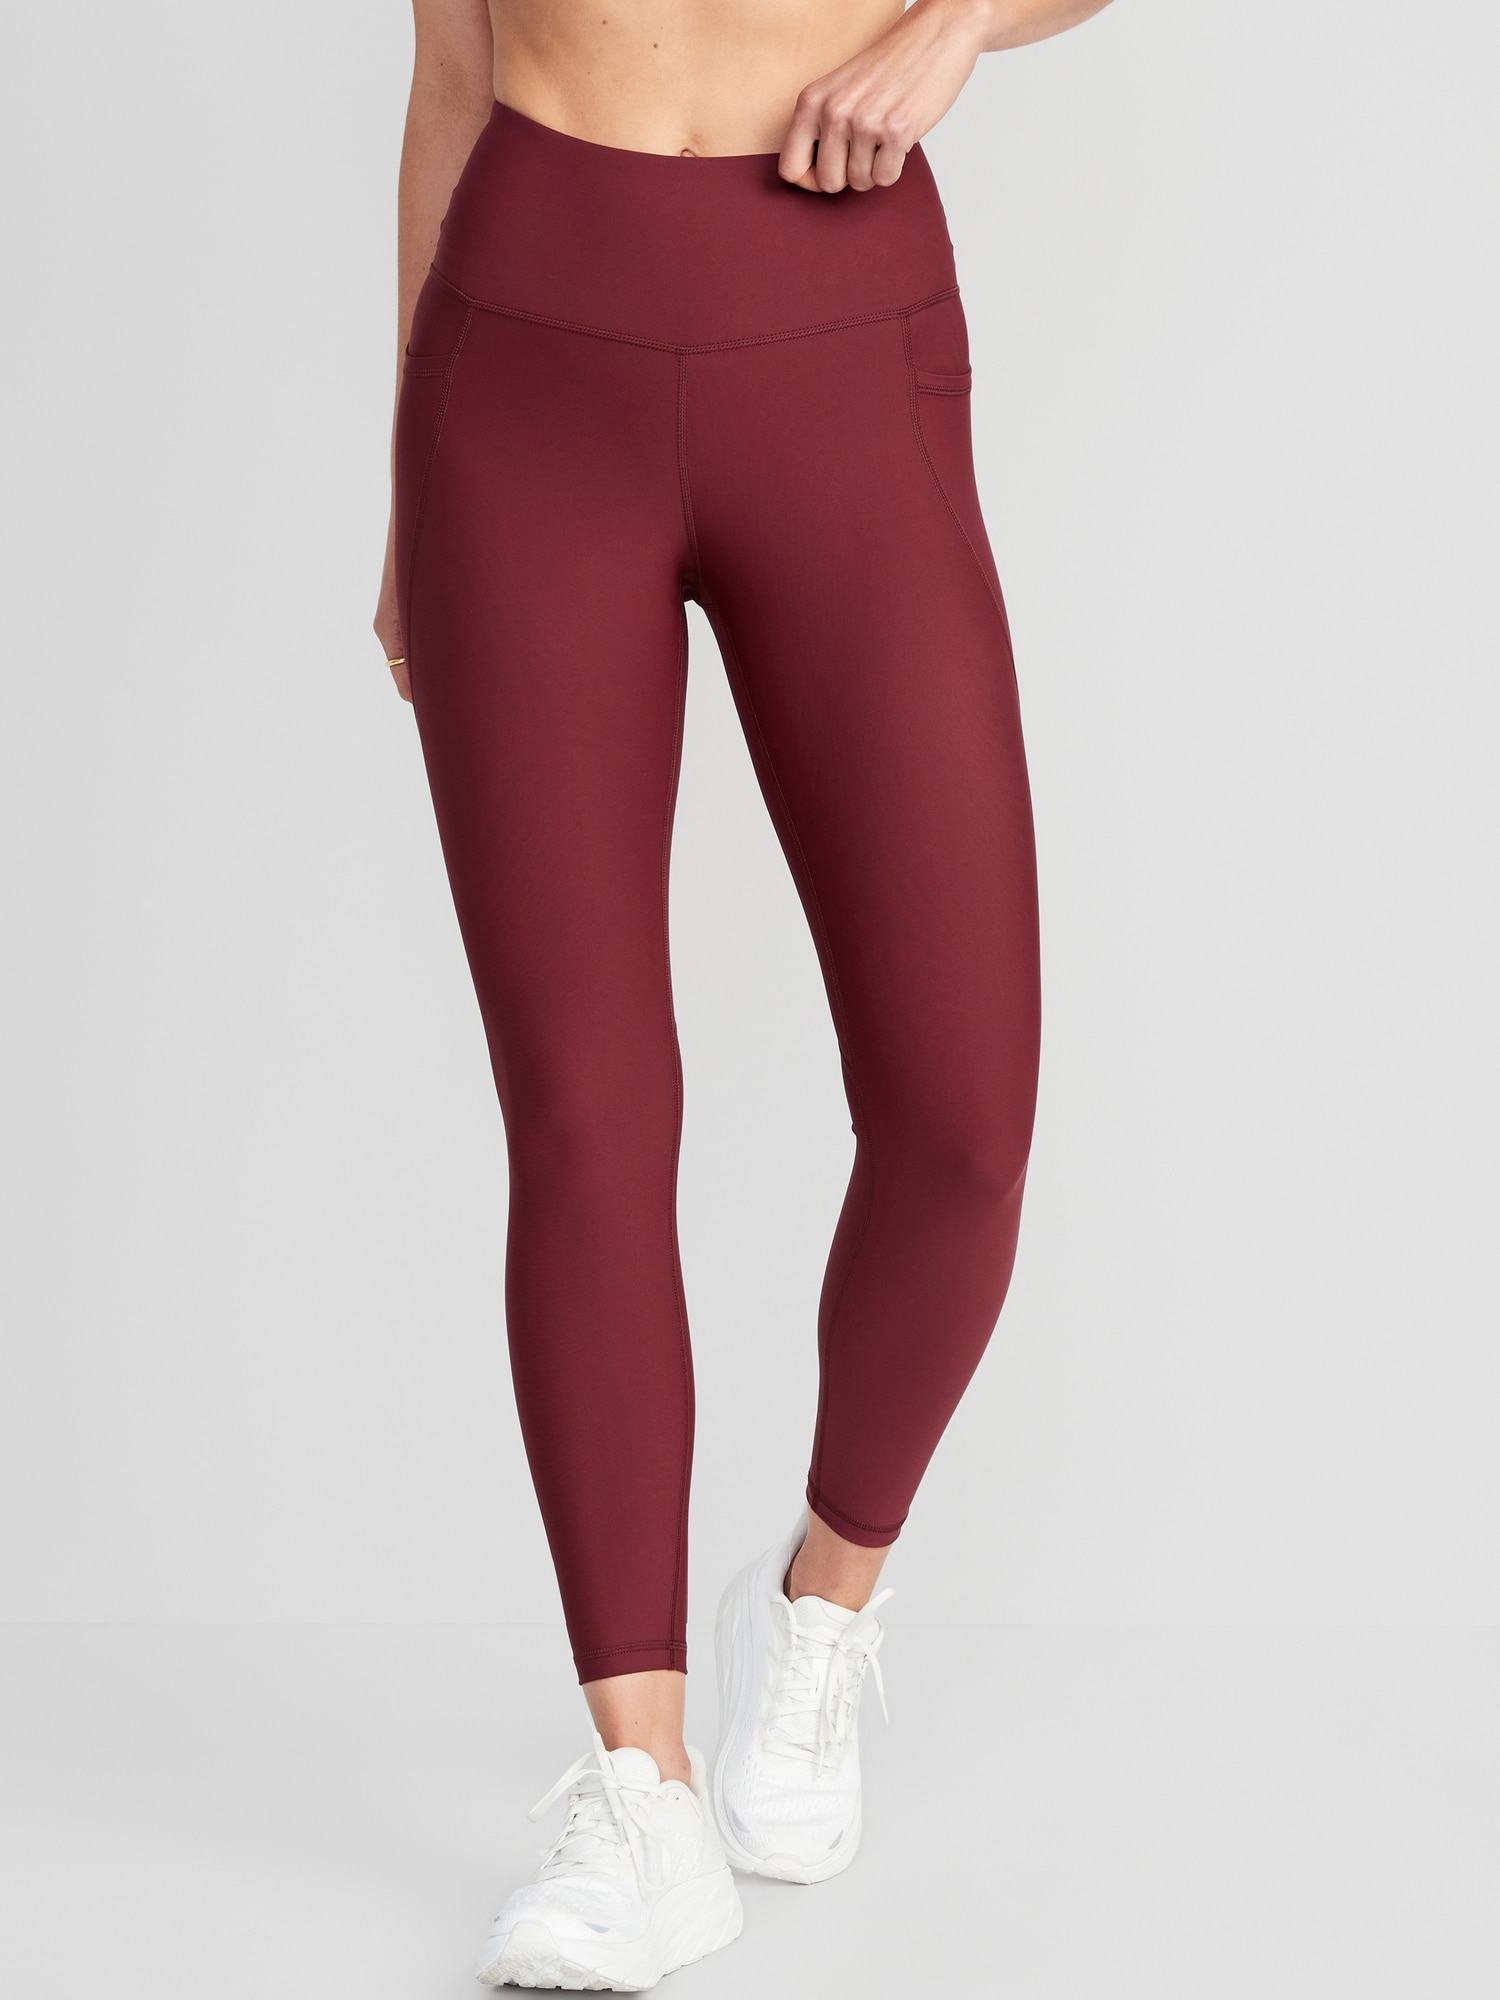 Old Navy High-Waisted PowerSoft 7/8 Leggings for Women red. 1